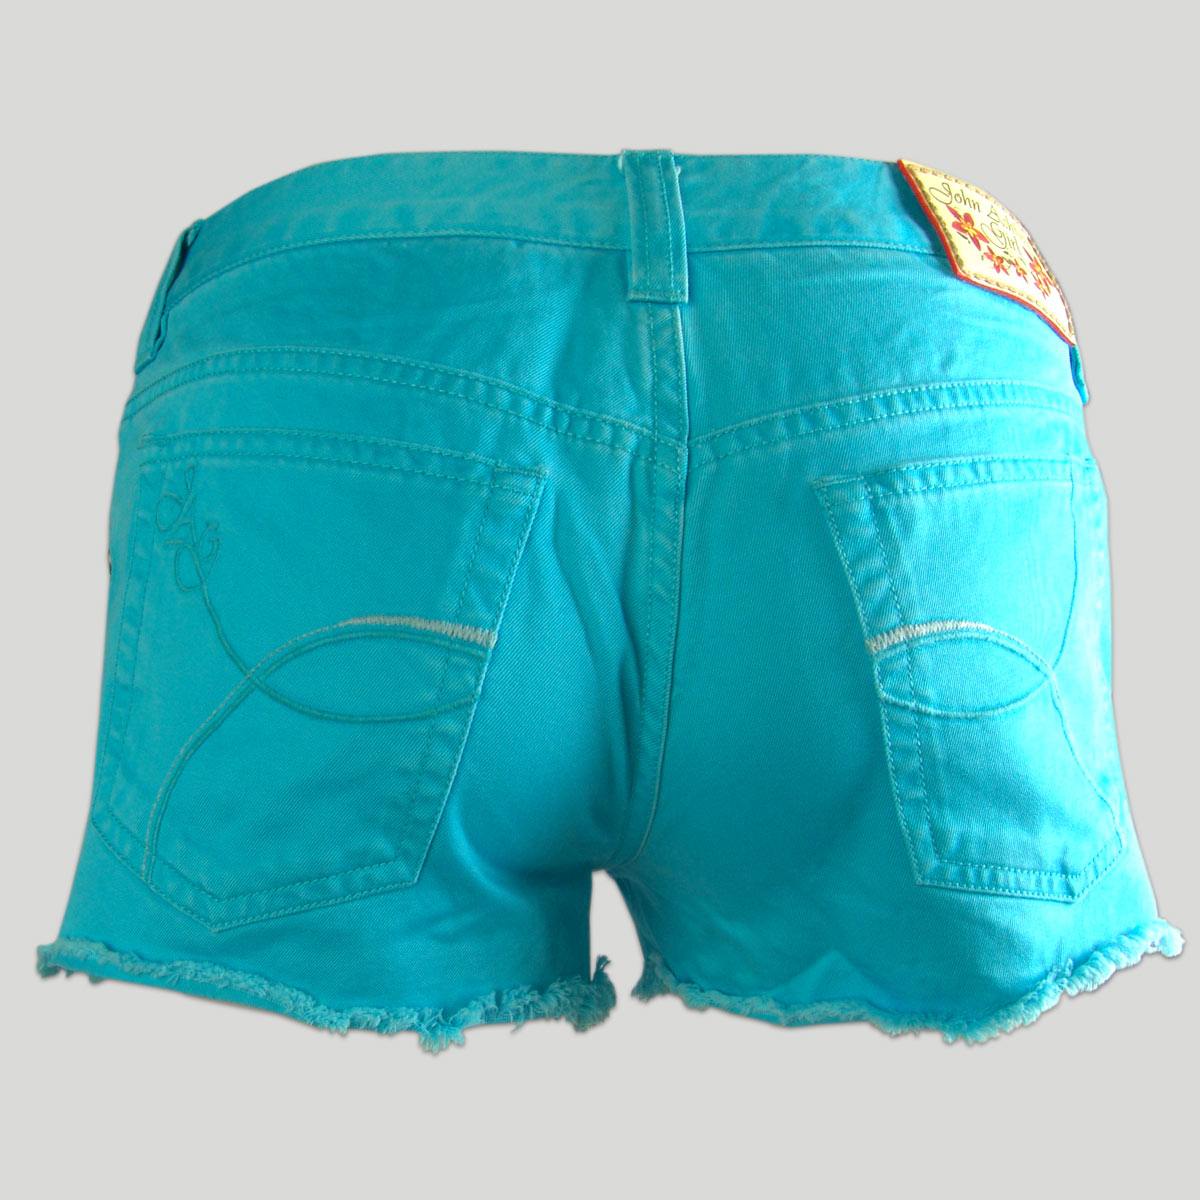 Five-pockets Short Jeans for Woman